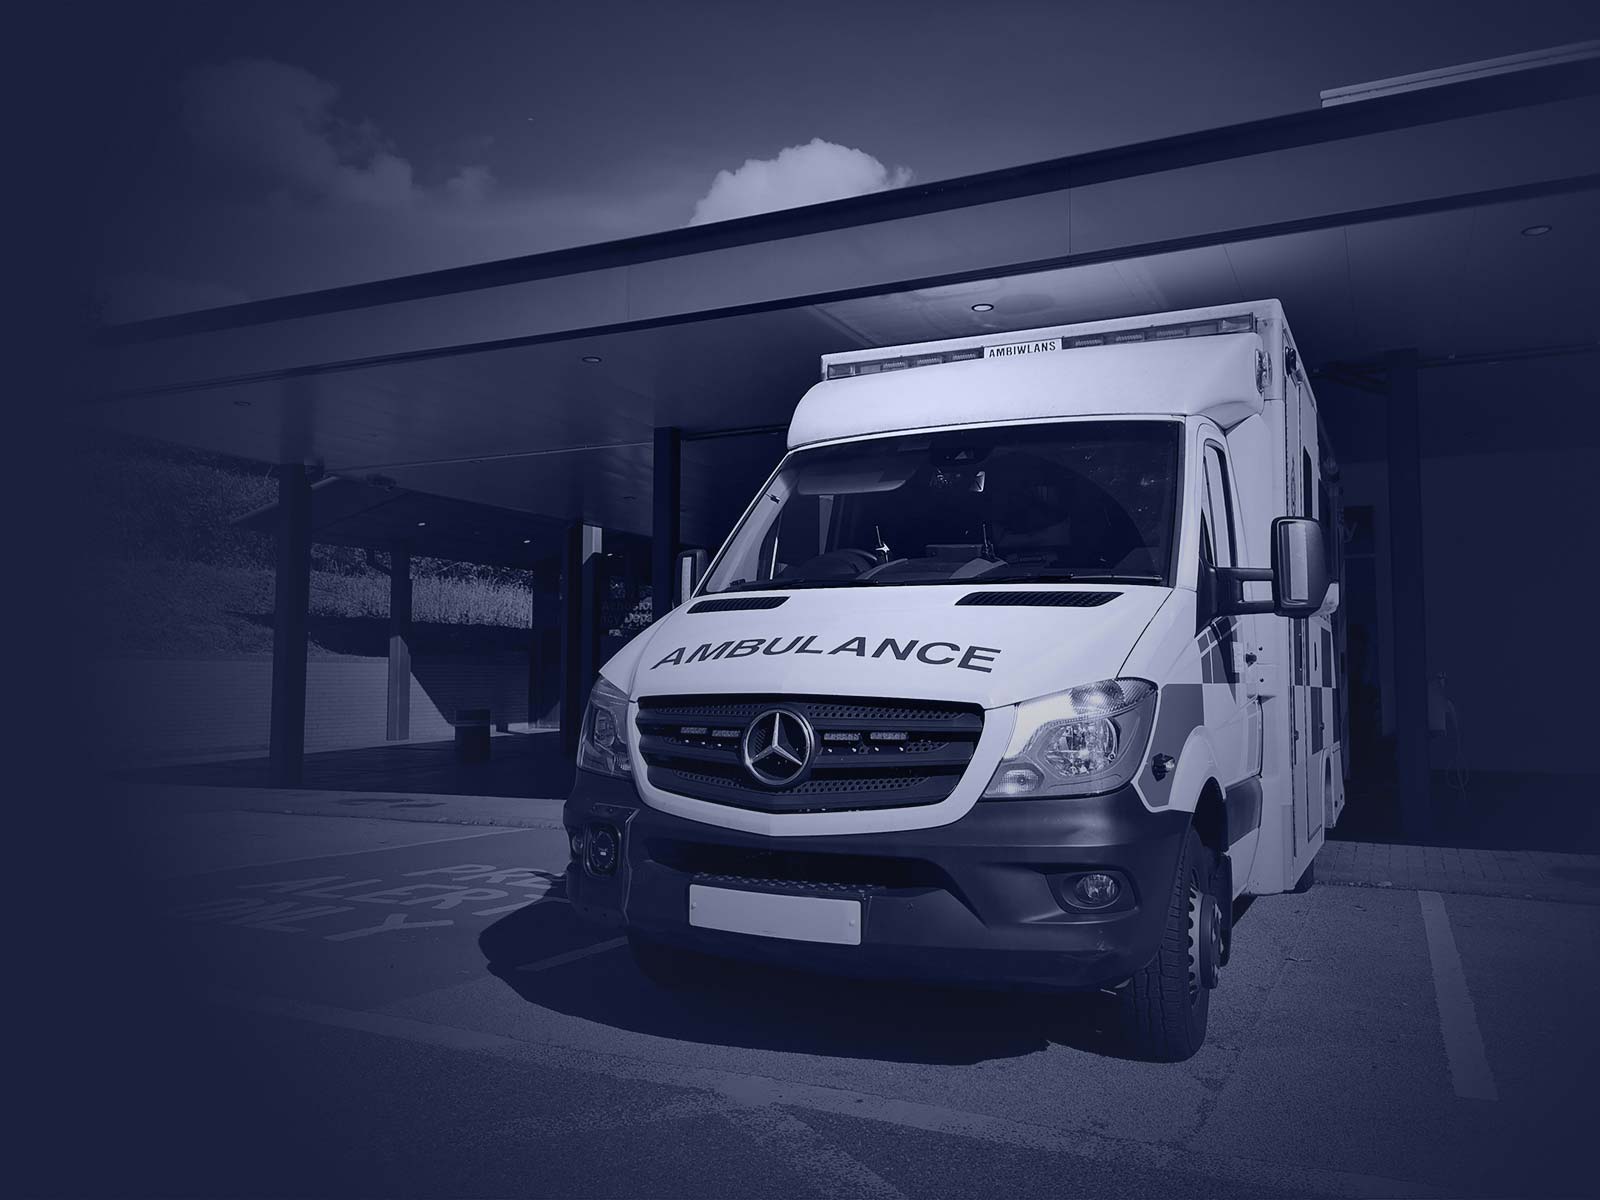 Urgent patients do not require a 999 emergency ambulance, but they do require a clinician and the clinical environment above that of routine patient transport services.